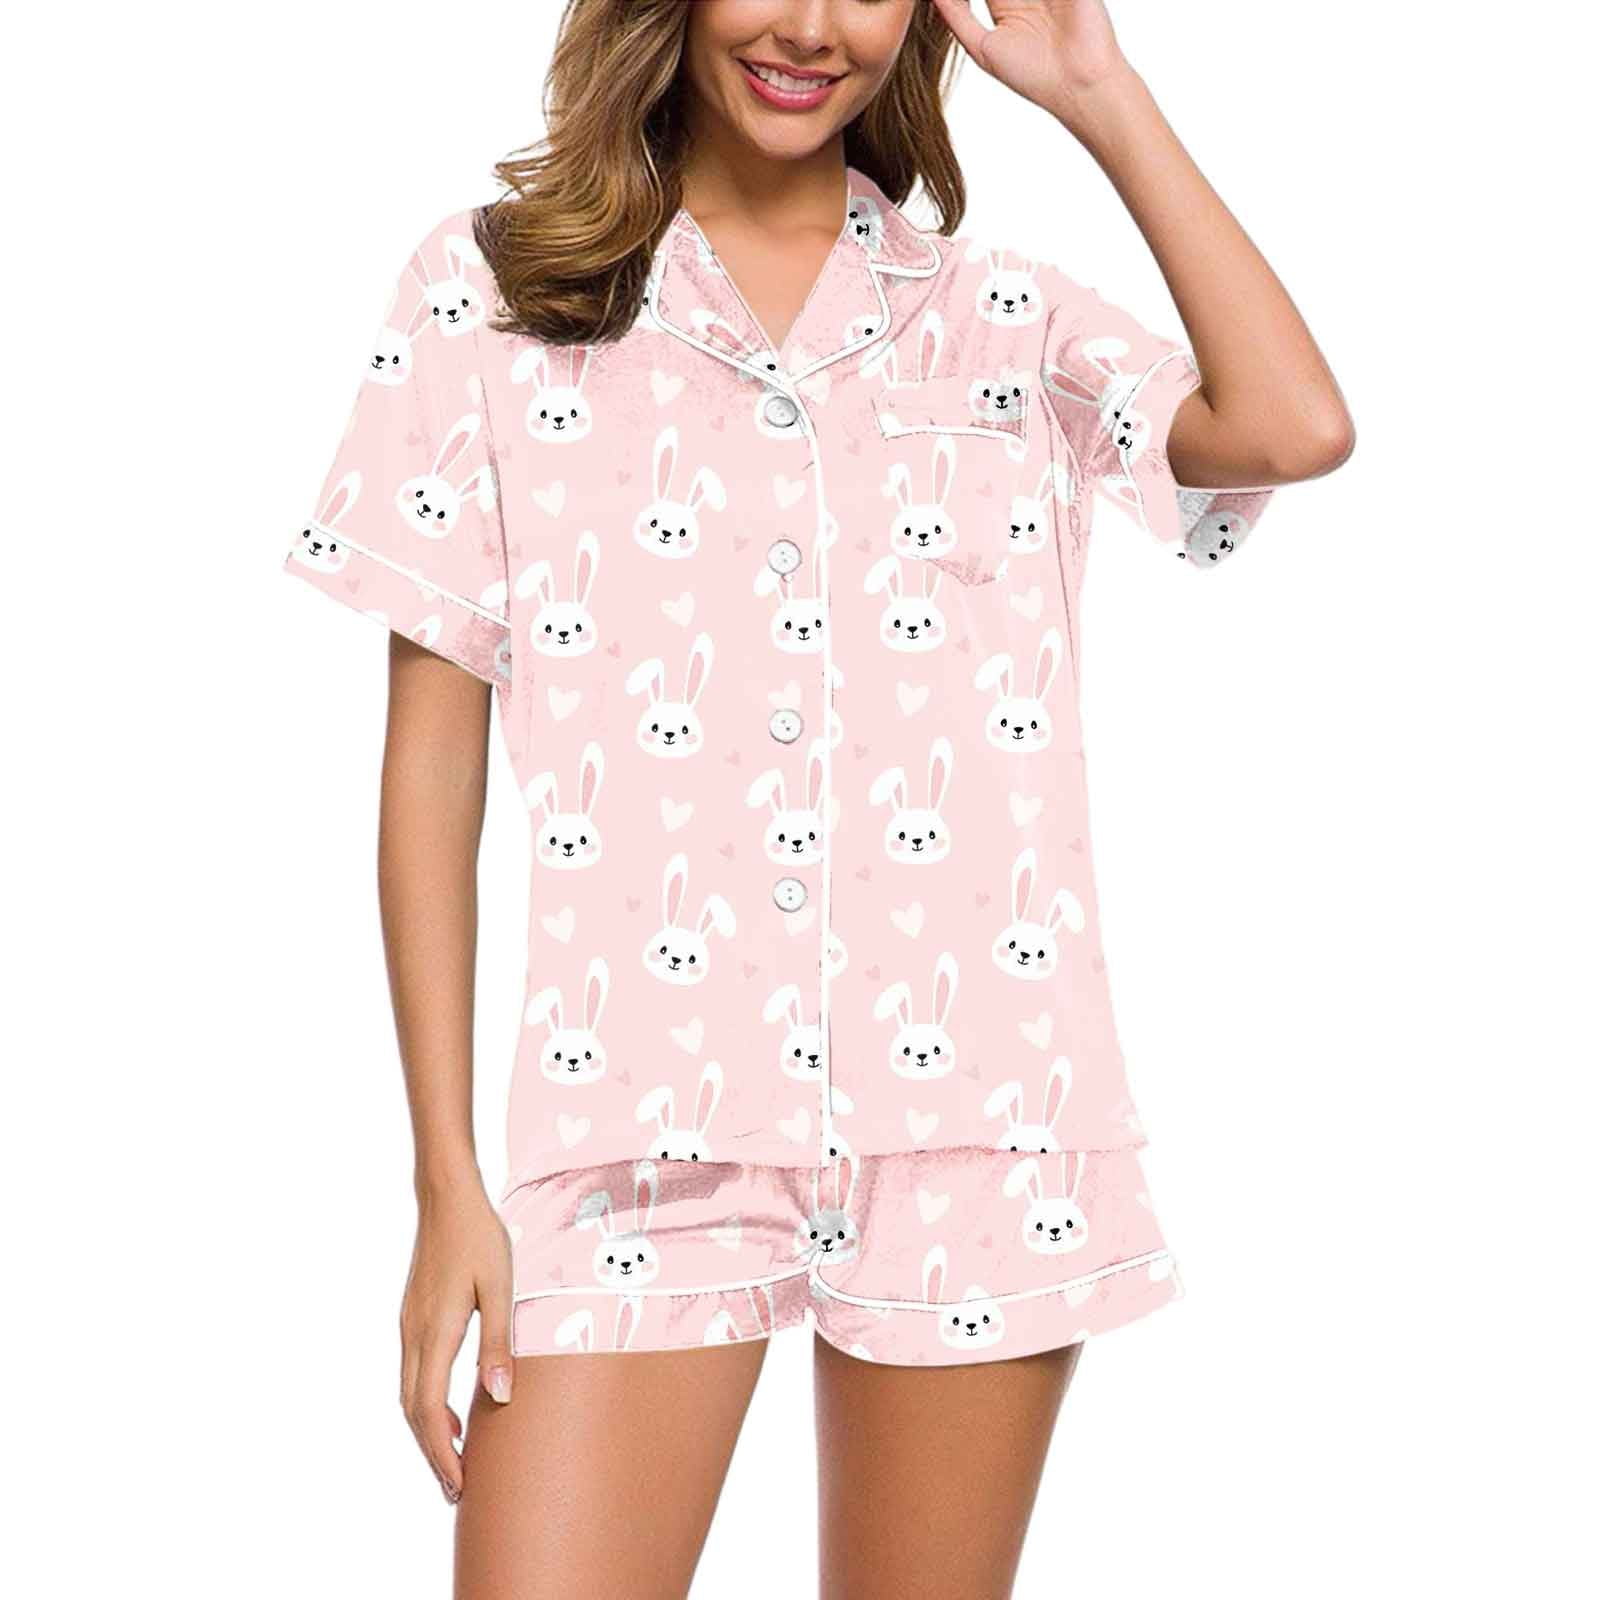 2 Piece Pj Sets Pajamas For Women Prints Short Sleeve Button Shirt And ...